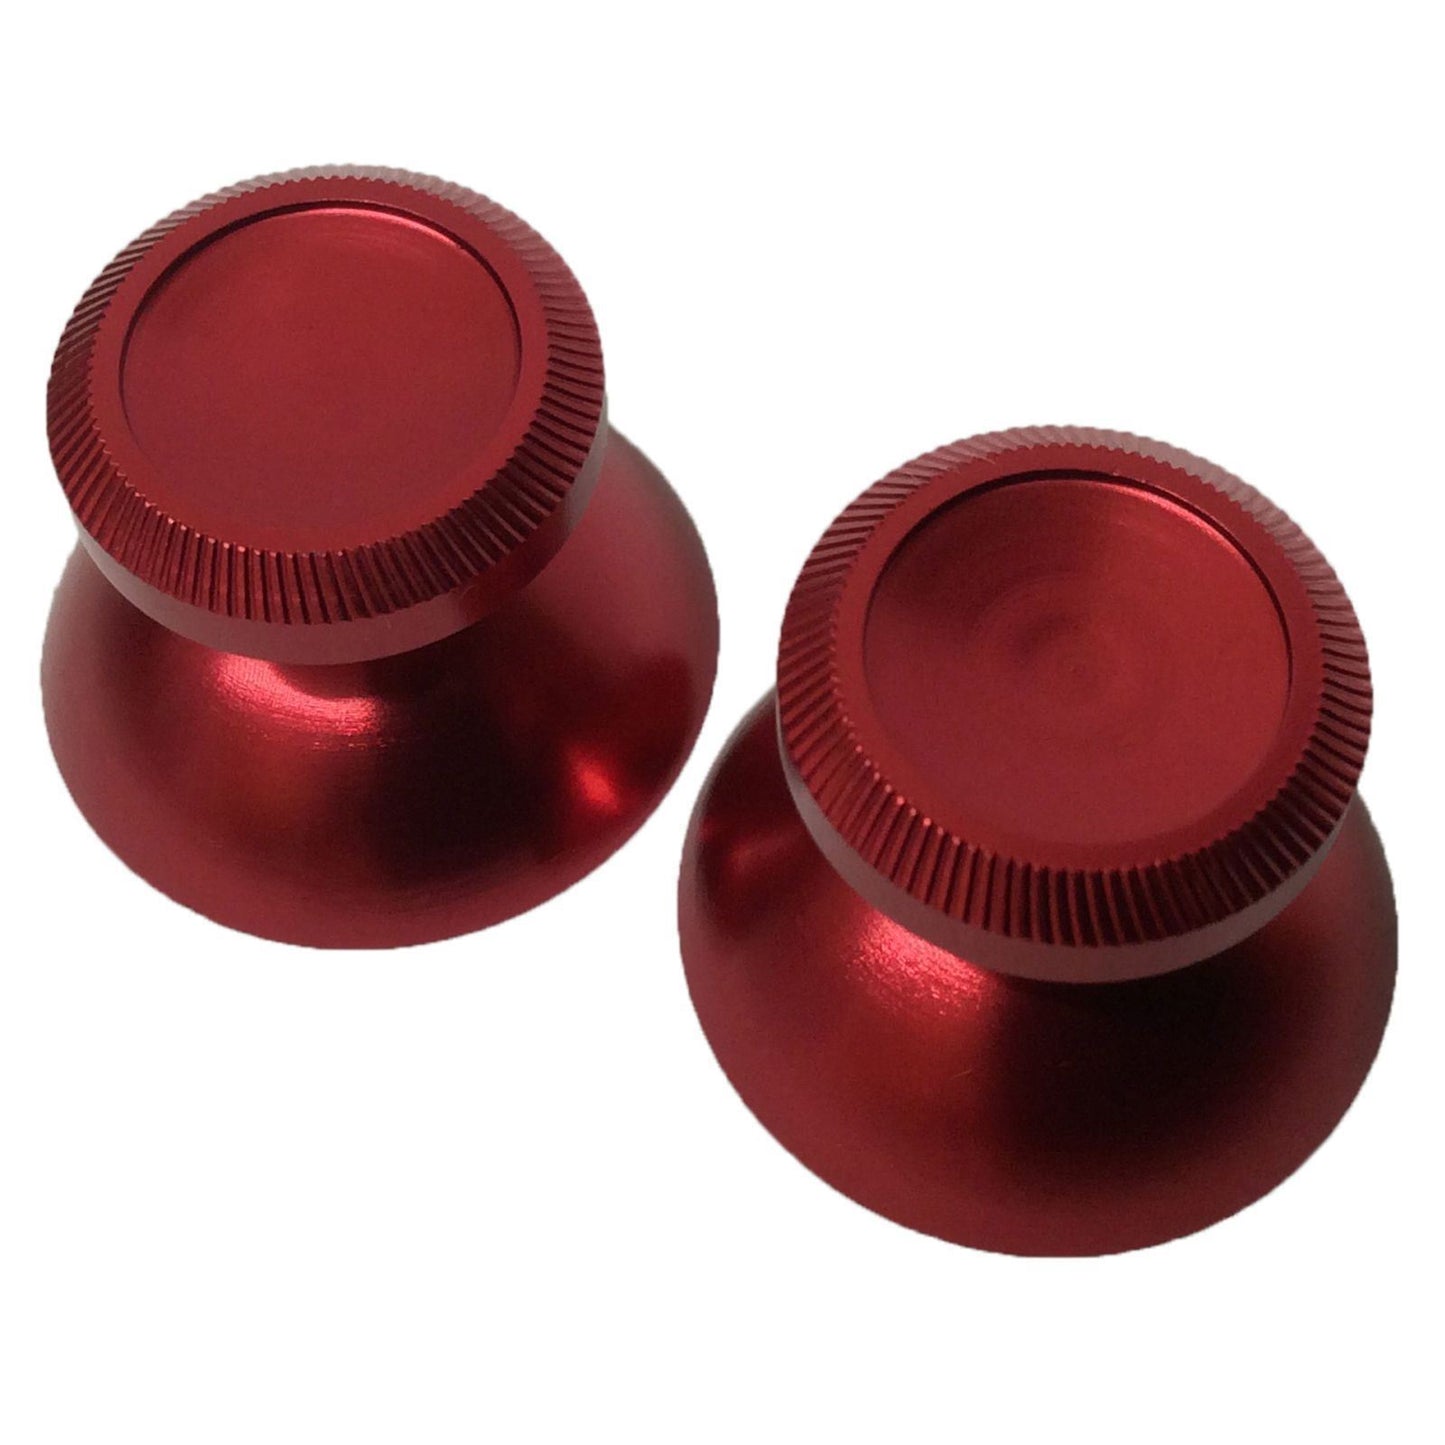 for PS4 | Xbox One Controller - 2x Chrome Metal Analog Thumb Sticks | FPC